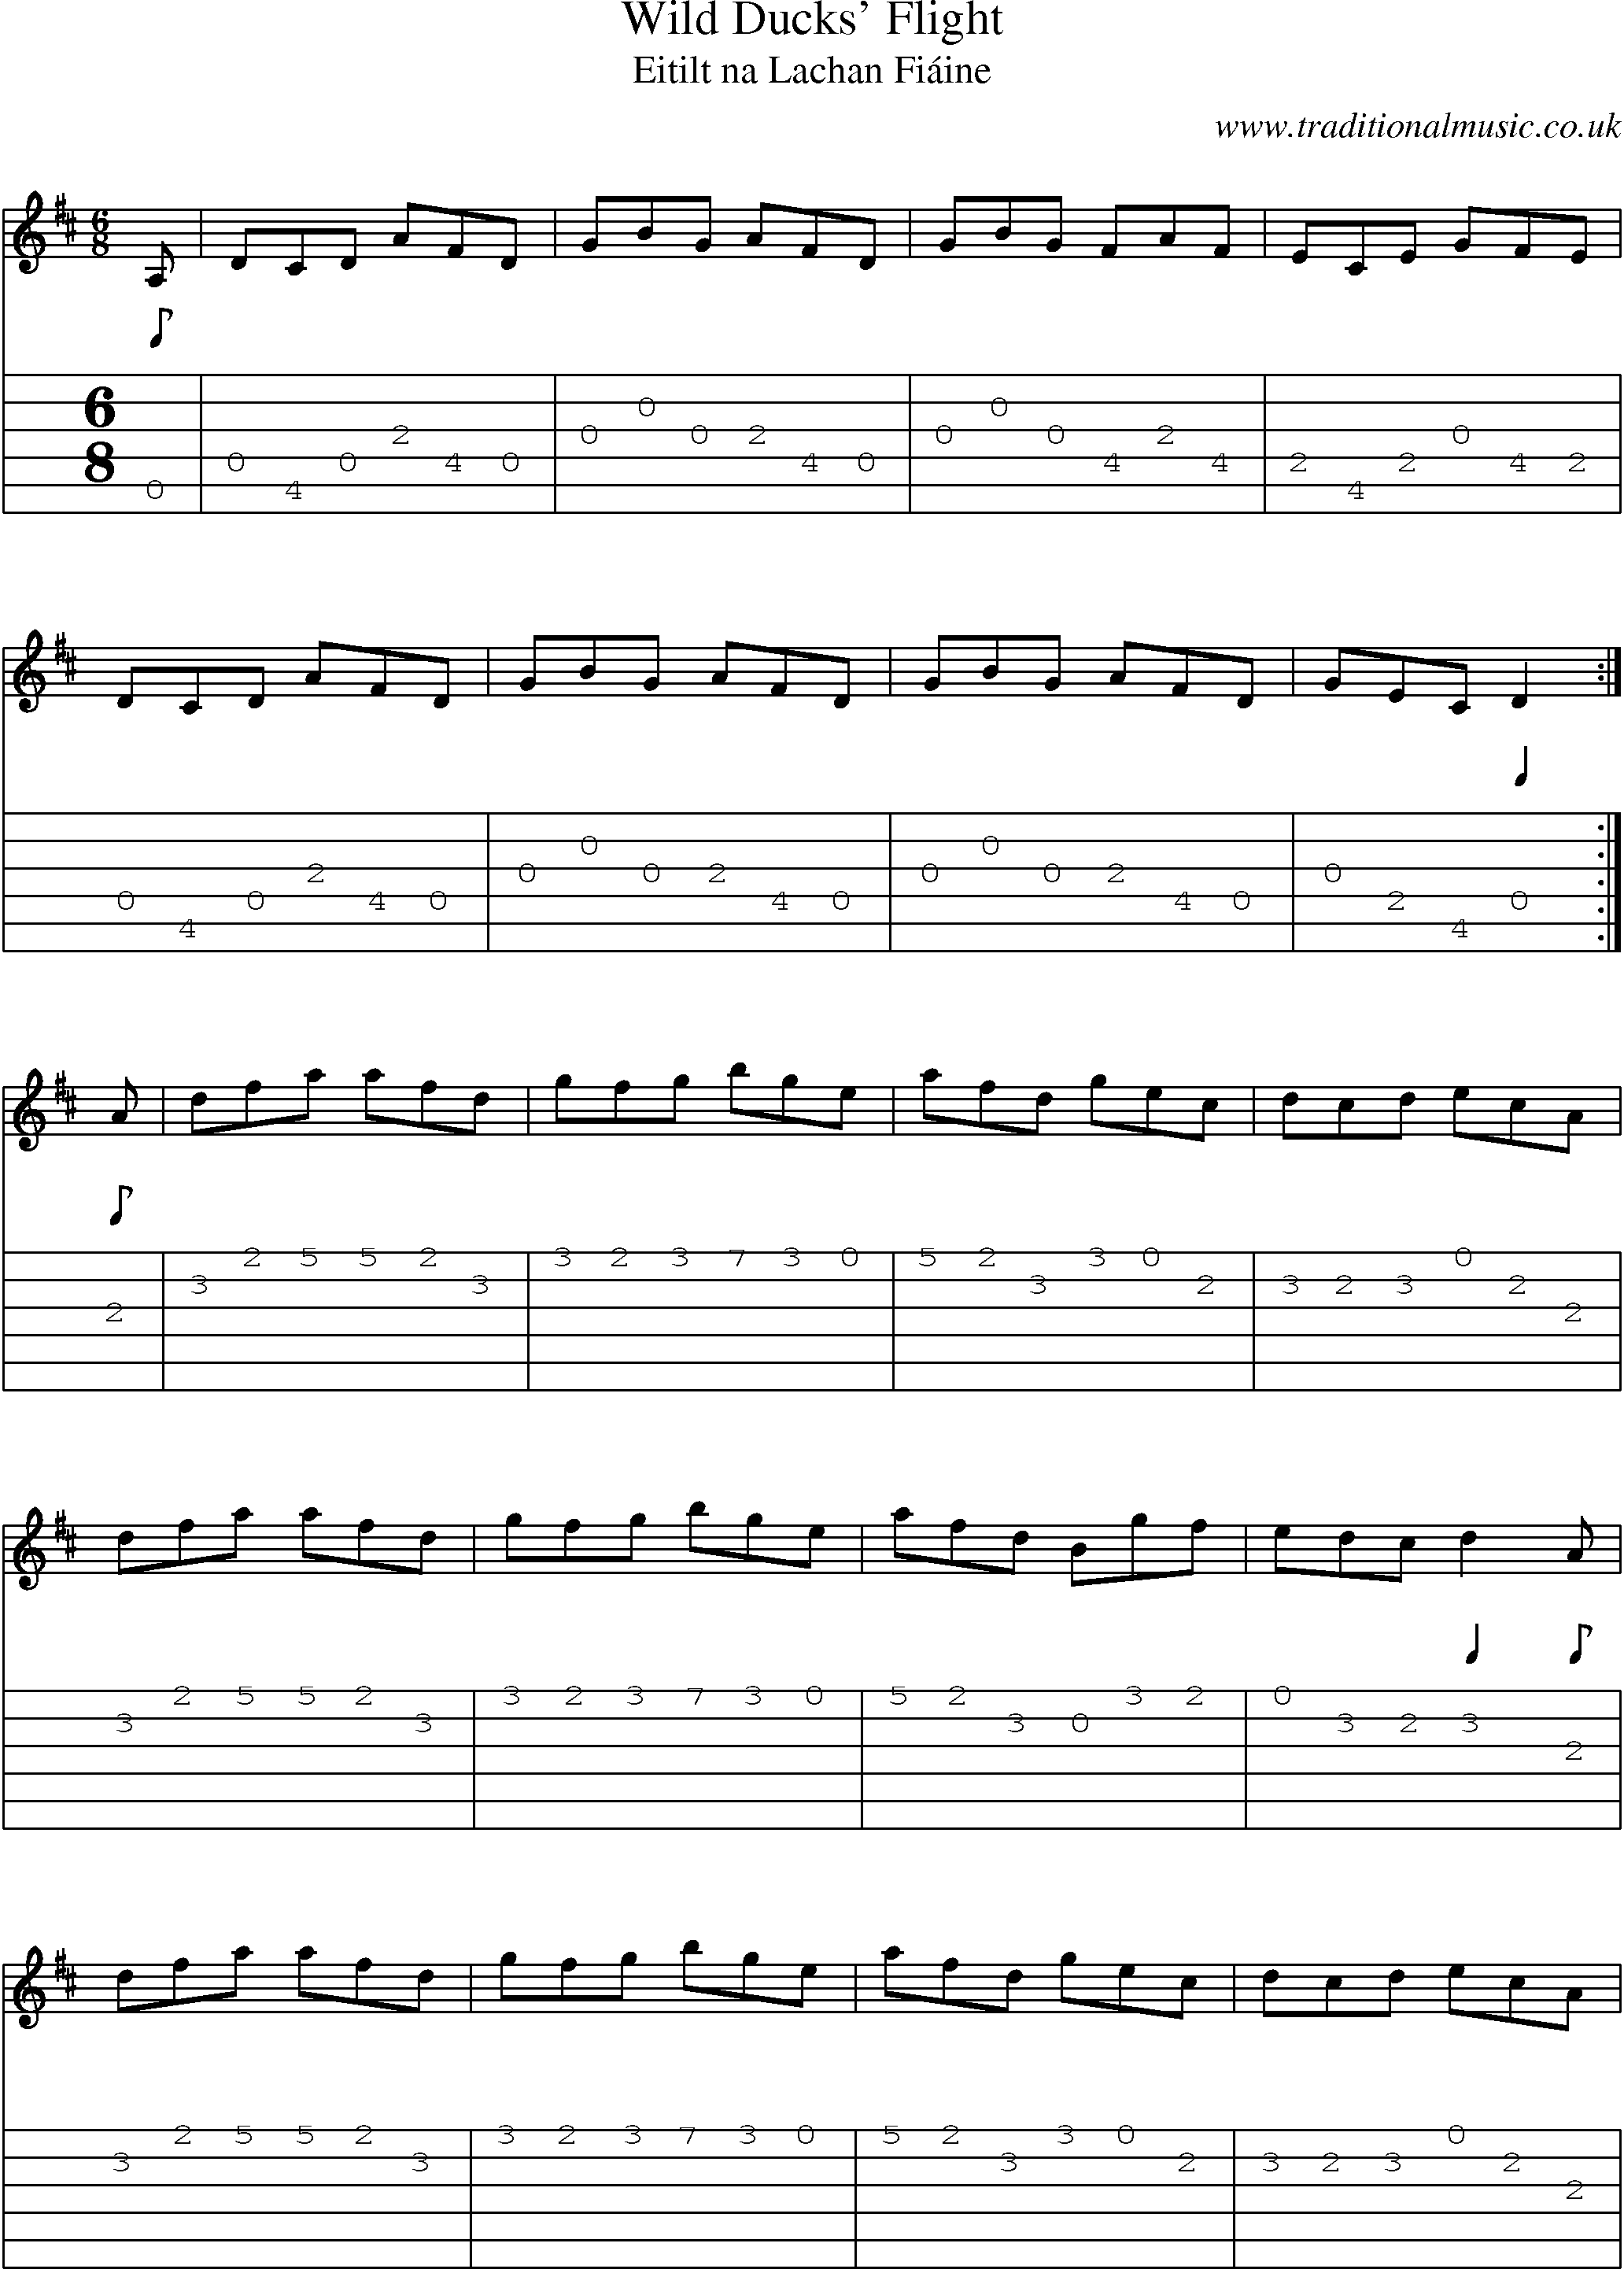 Music Score and Guitar Tabs for Wild Ducks Flight